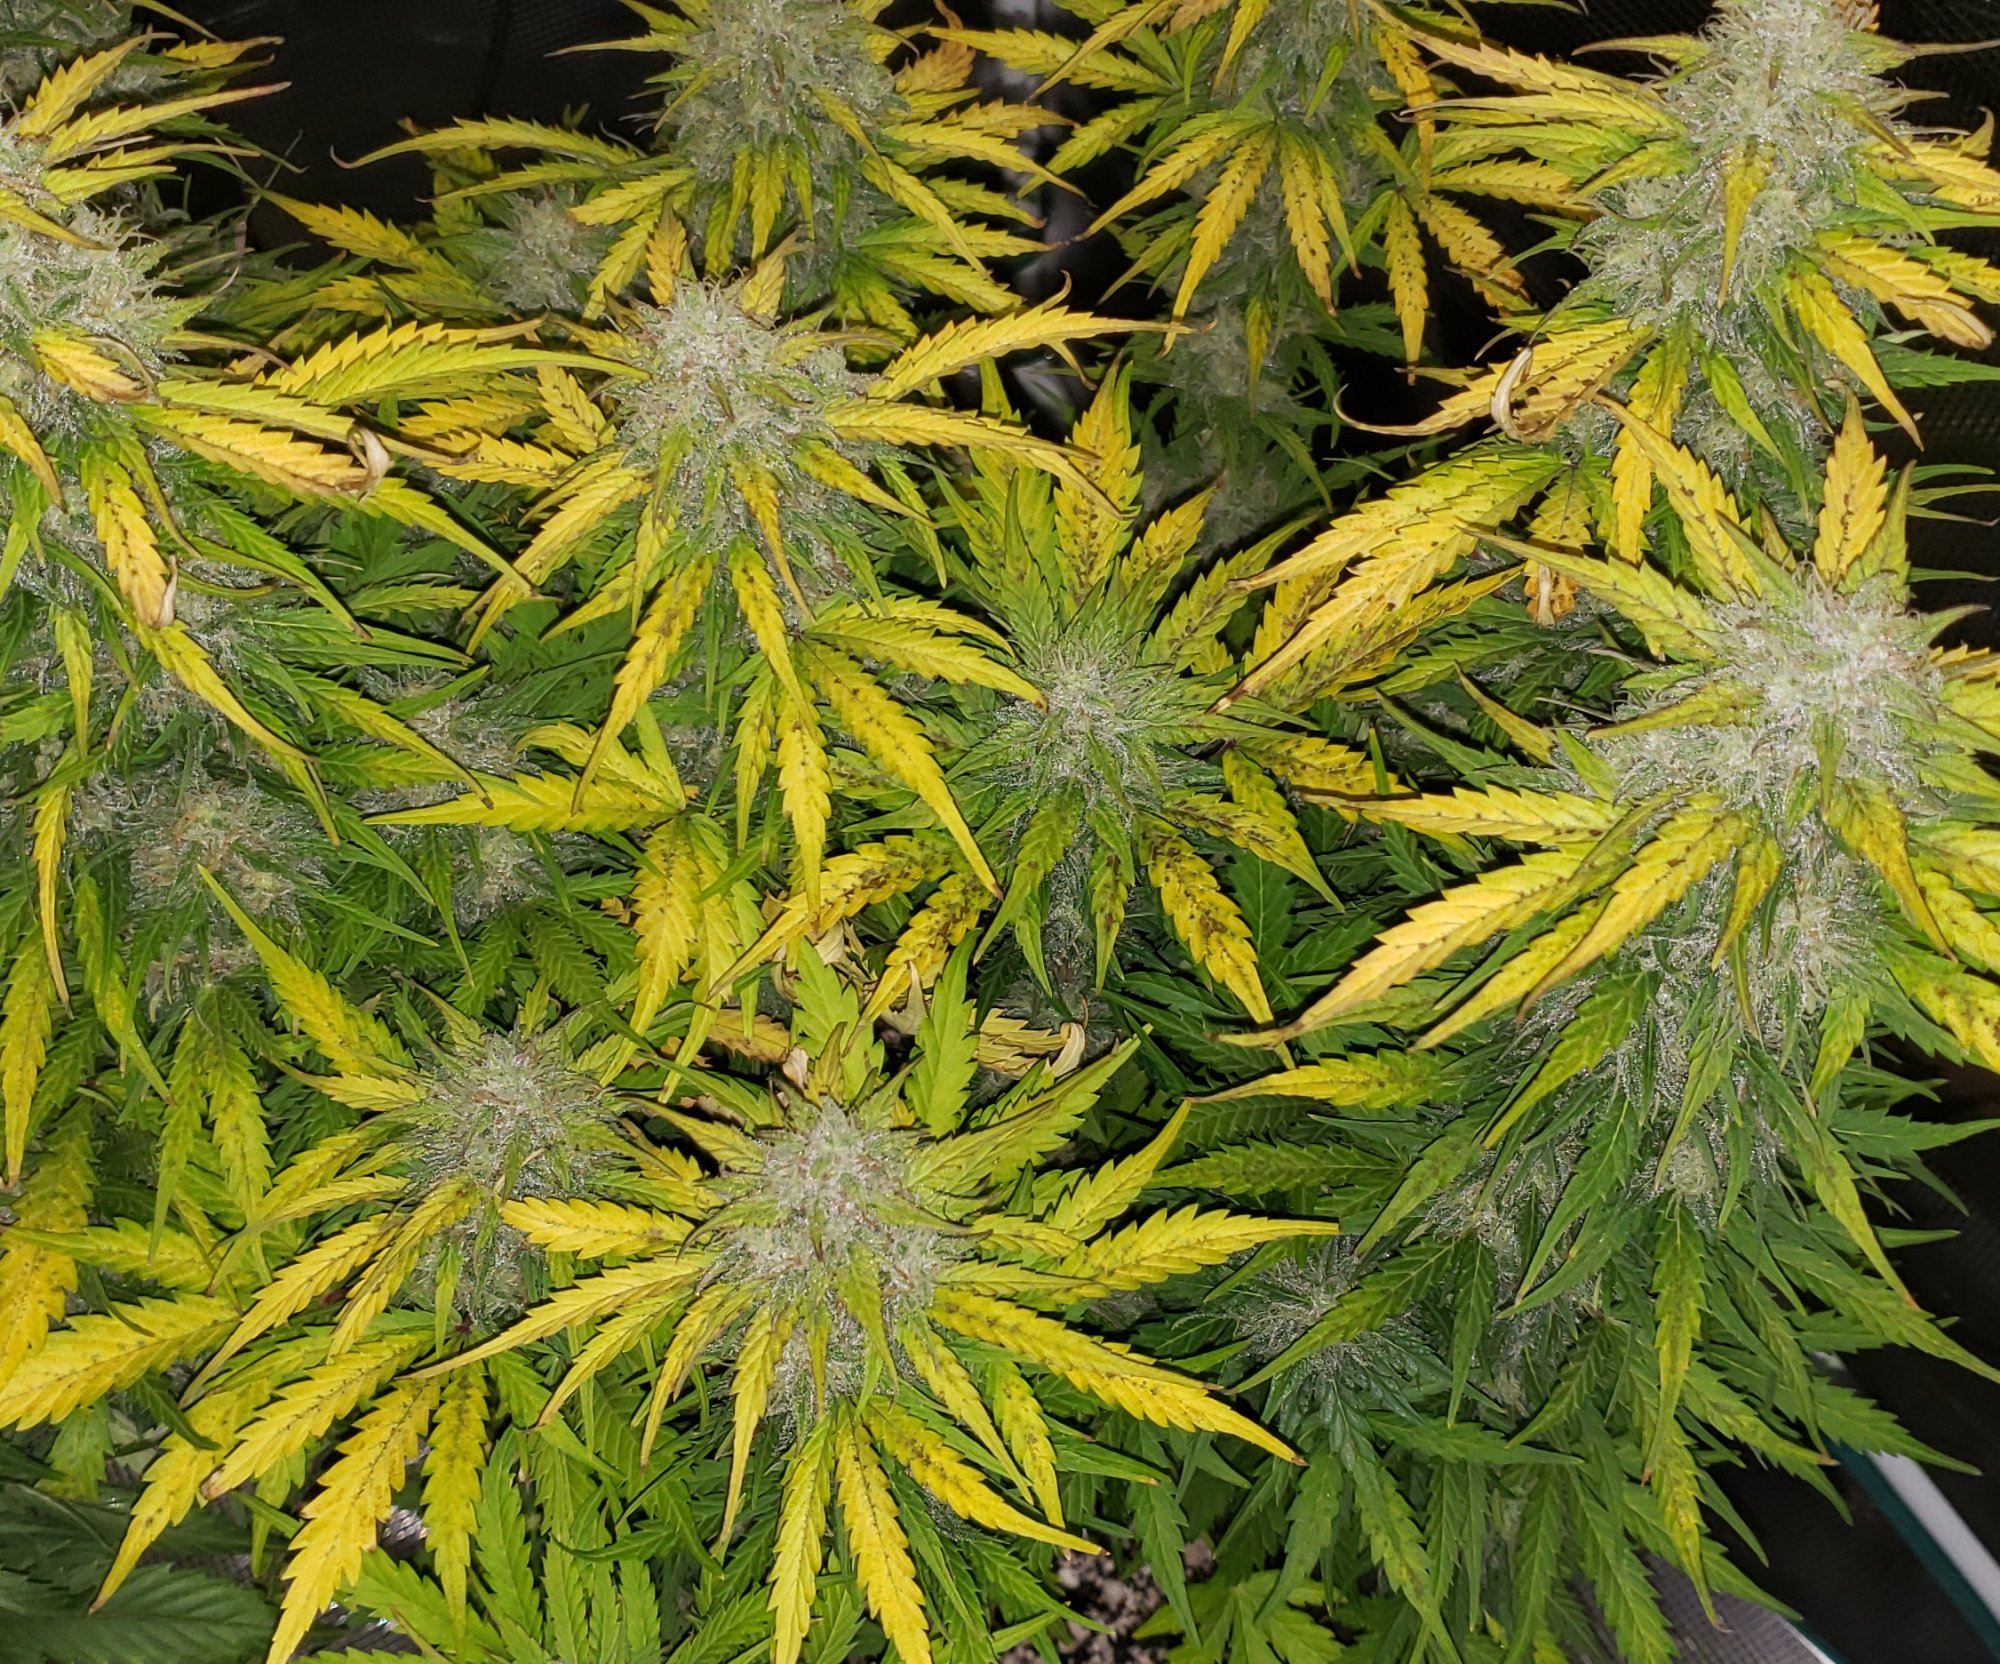 Yellowing upper leaves with dark spots